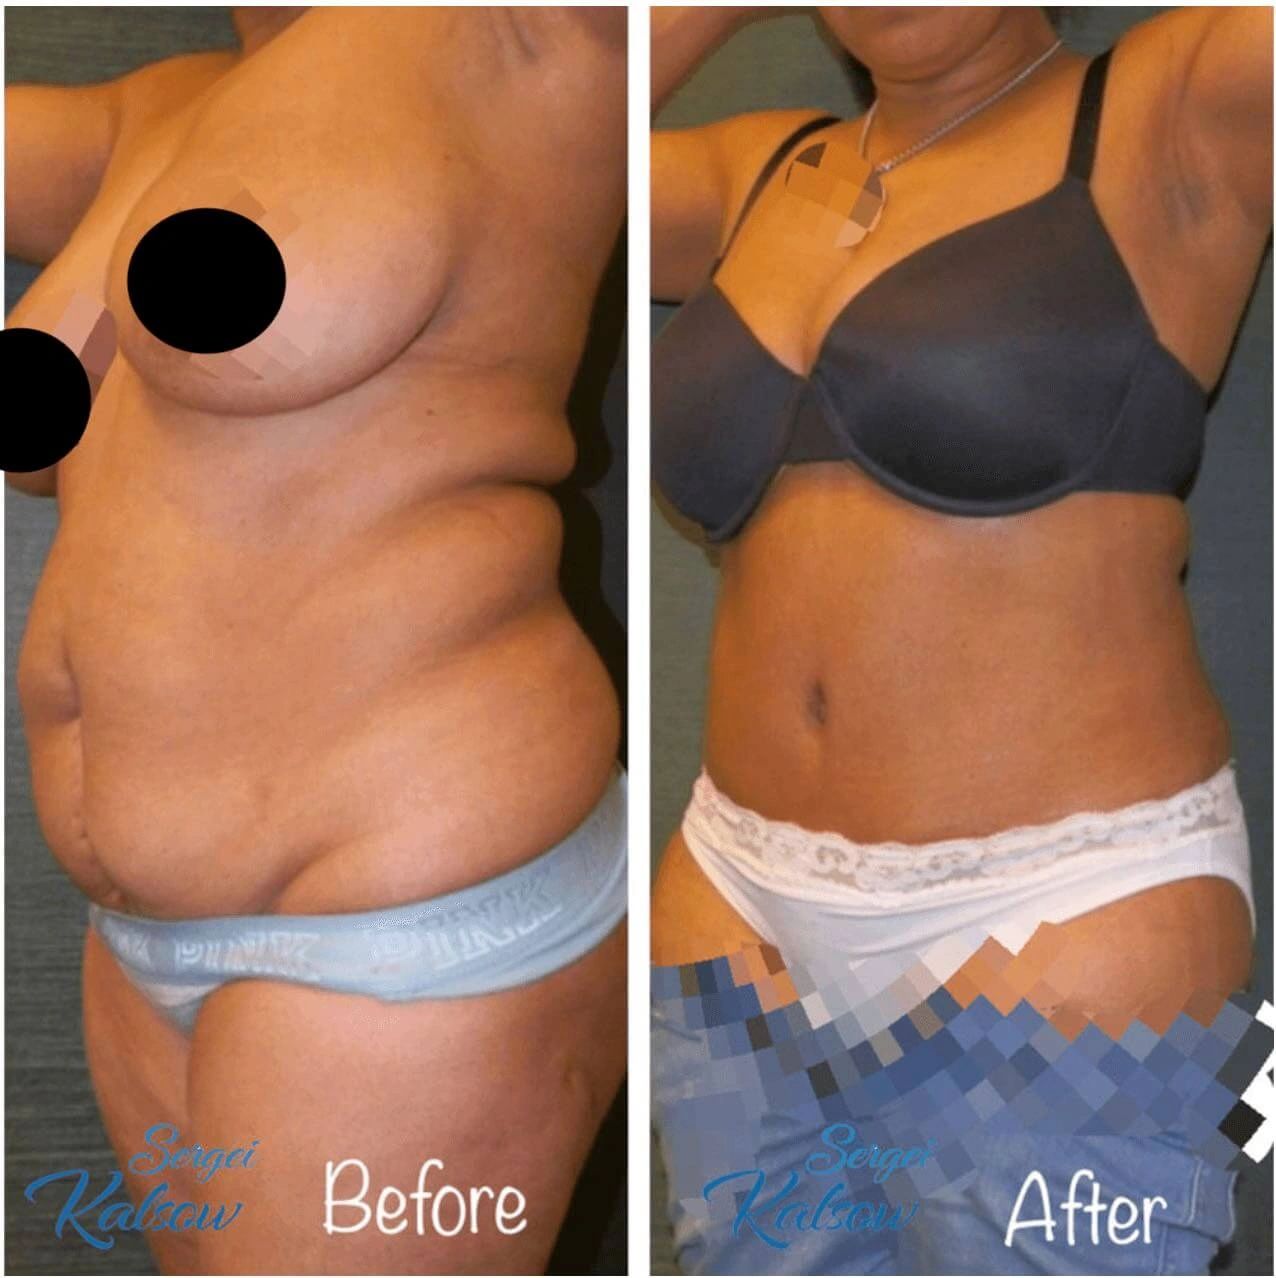 Full tummy tuck/abdominoplasty.  The after photo shows a natural result with a flatter stomach, natural belly button, and a thinner waist.  